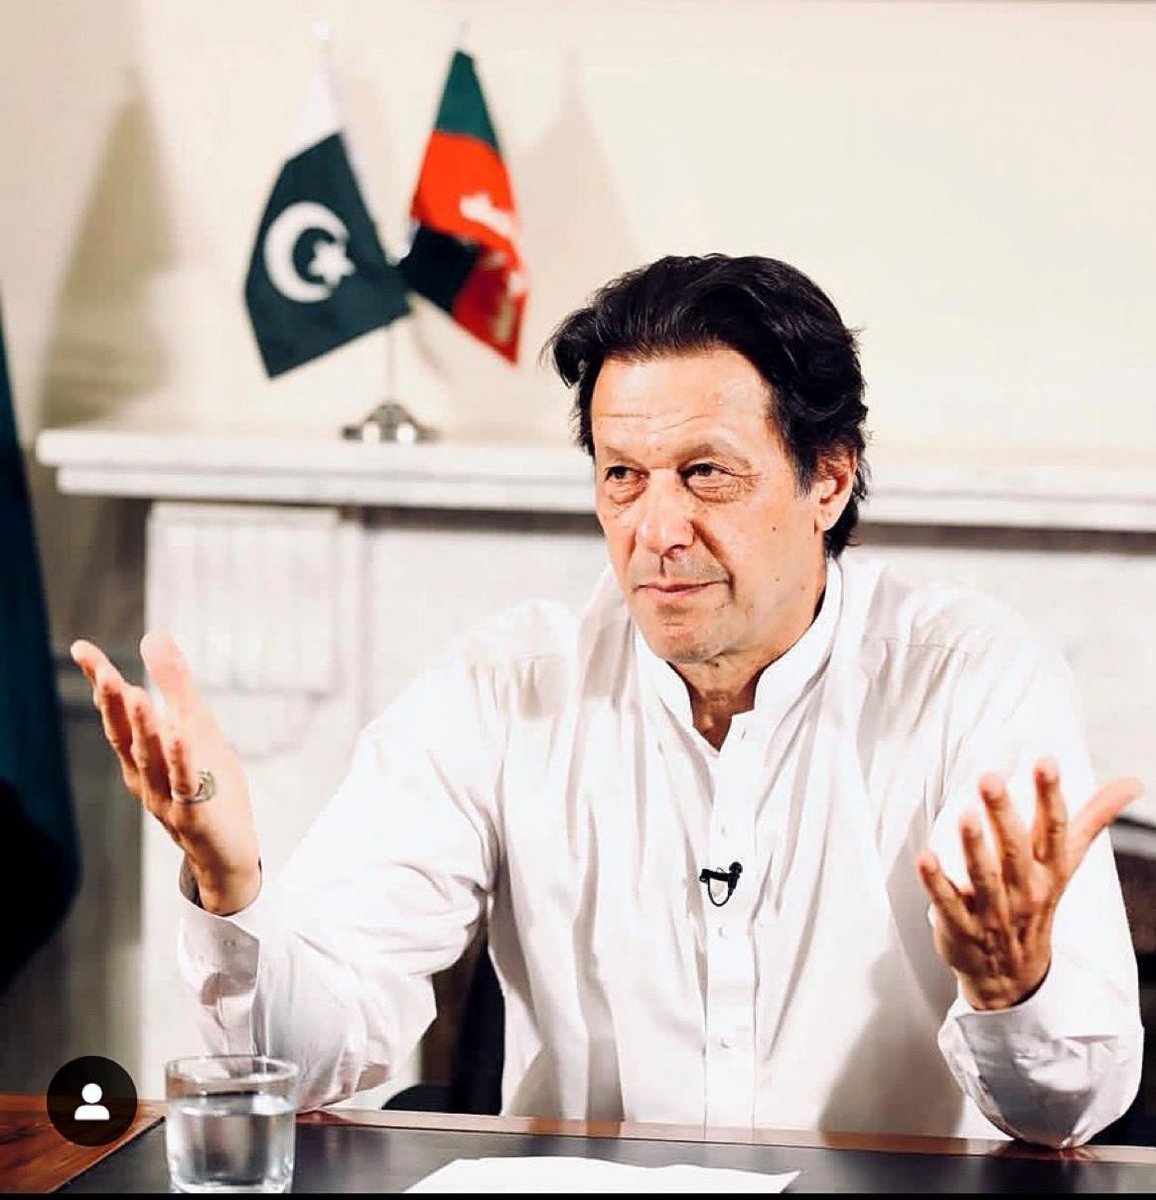 Can You Stand for 🇵🇰? Stand for KAPTAN? Stand for truth? Stand against injustice? Stand against Mafia? Stand against enemies? Stand against puppets? Stand against corruption? If YES then we Welcome you in Team Insafians Power ✌ @TeamiPians